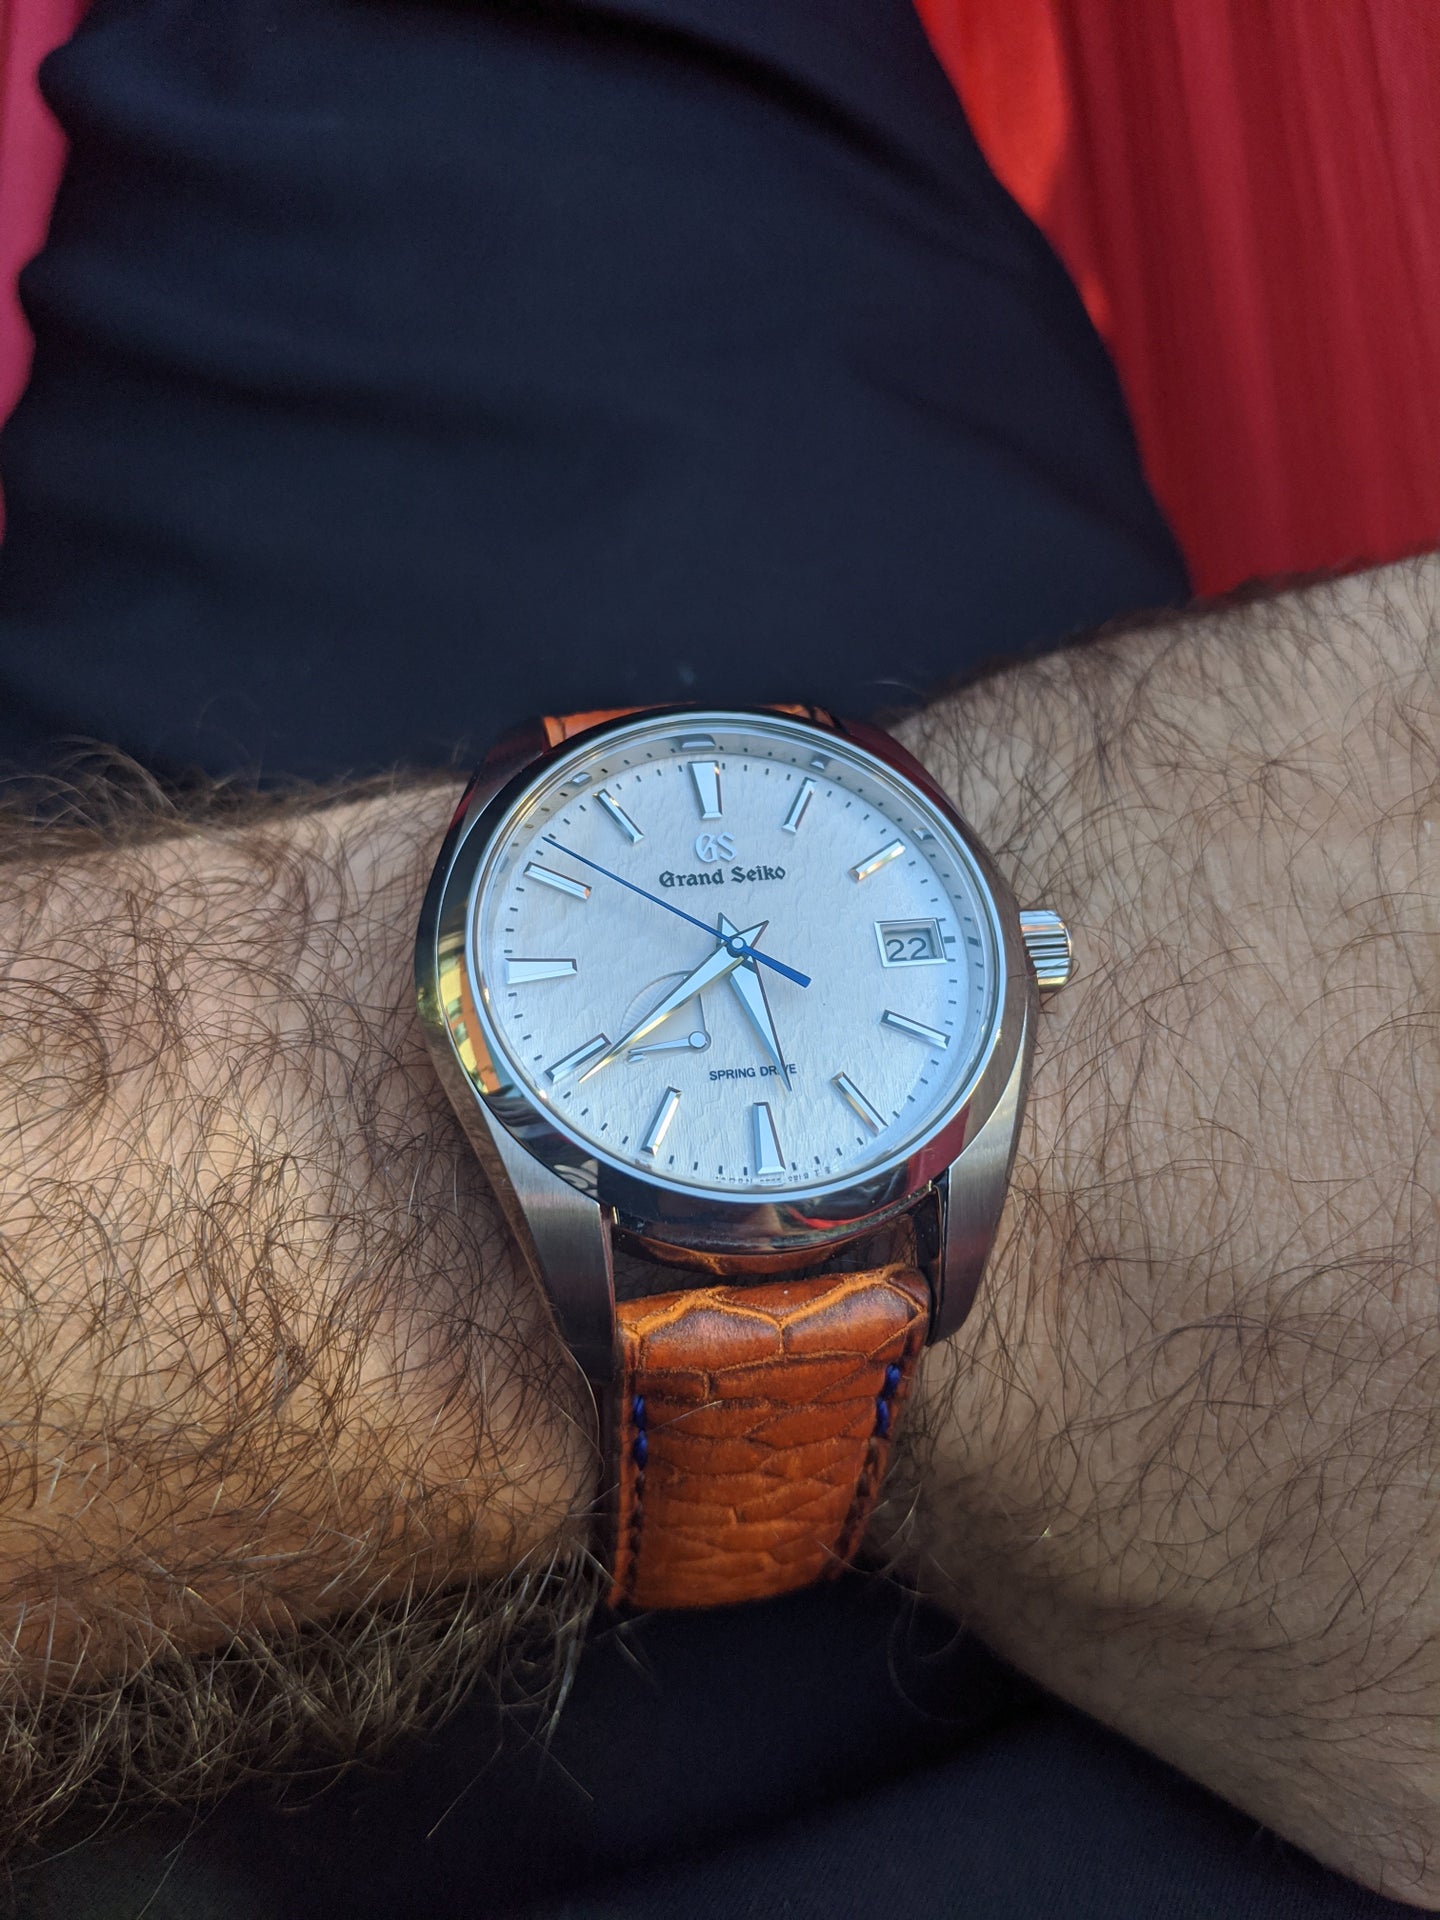 Snowflake on a leather strap? | WatchUSeek Watch Forums